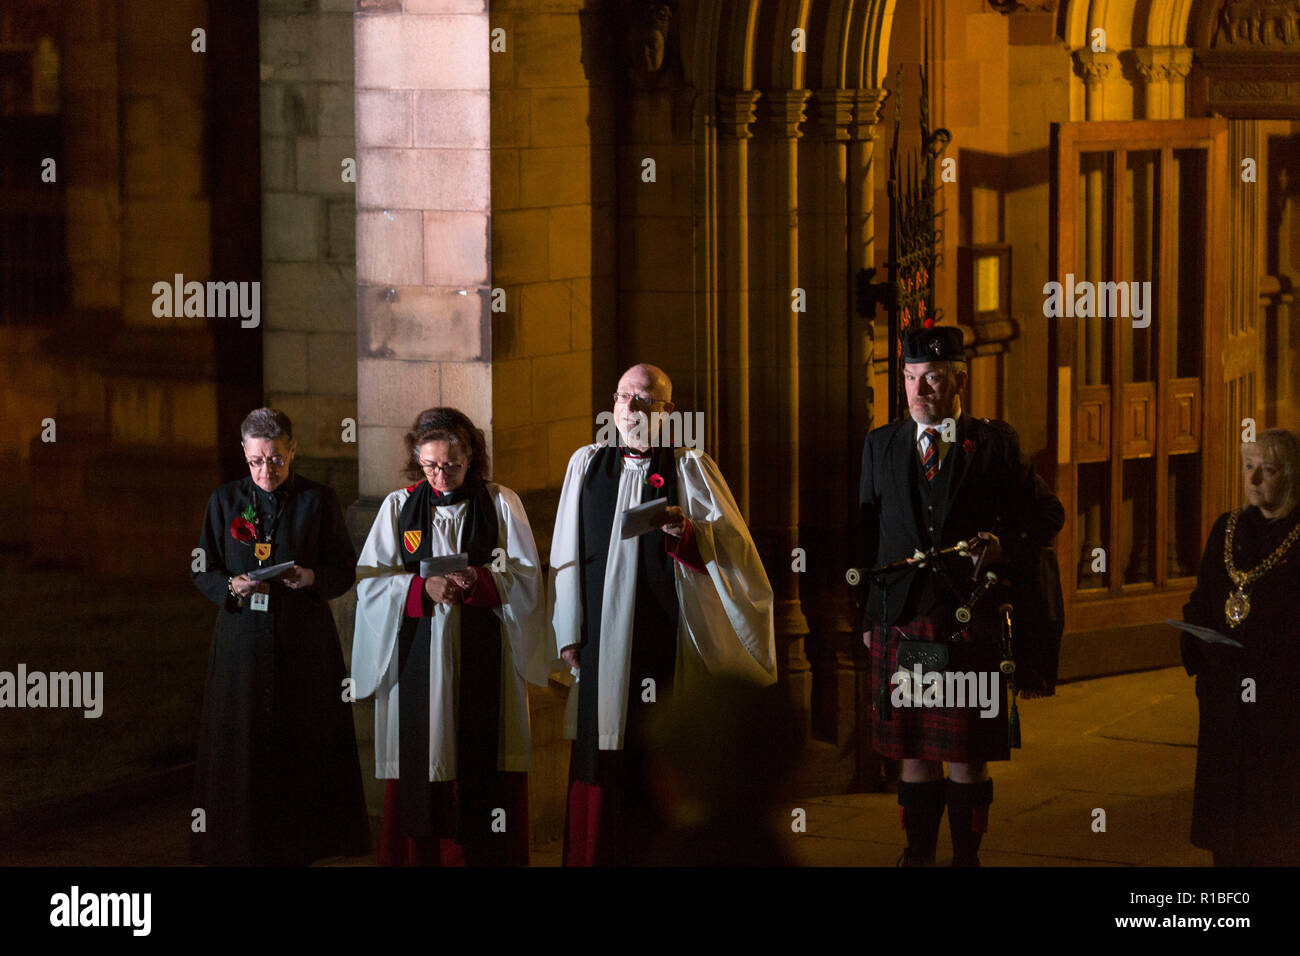 Manchester , England , 11th November 2018  Armistice Day in Manchester. Today (Sunday 11 November) marks 100 years since the end of the First World War. At 6 a.m. a lone piper plays the traditional Scottish lament, Battle O'er, outside Manchester Cathedral to herald the start of commemorations. Canon David Holgate ,acting Dean of Manchester Cathedral  is pictured after the lament was played. Piper Neil Macdonald joined around 1,000 other pipers  across the UK and around the world playing at 6.00 a.m. Credit: Chris Bull/Alamy Live News. Stock Photo